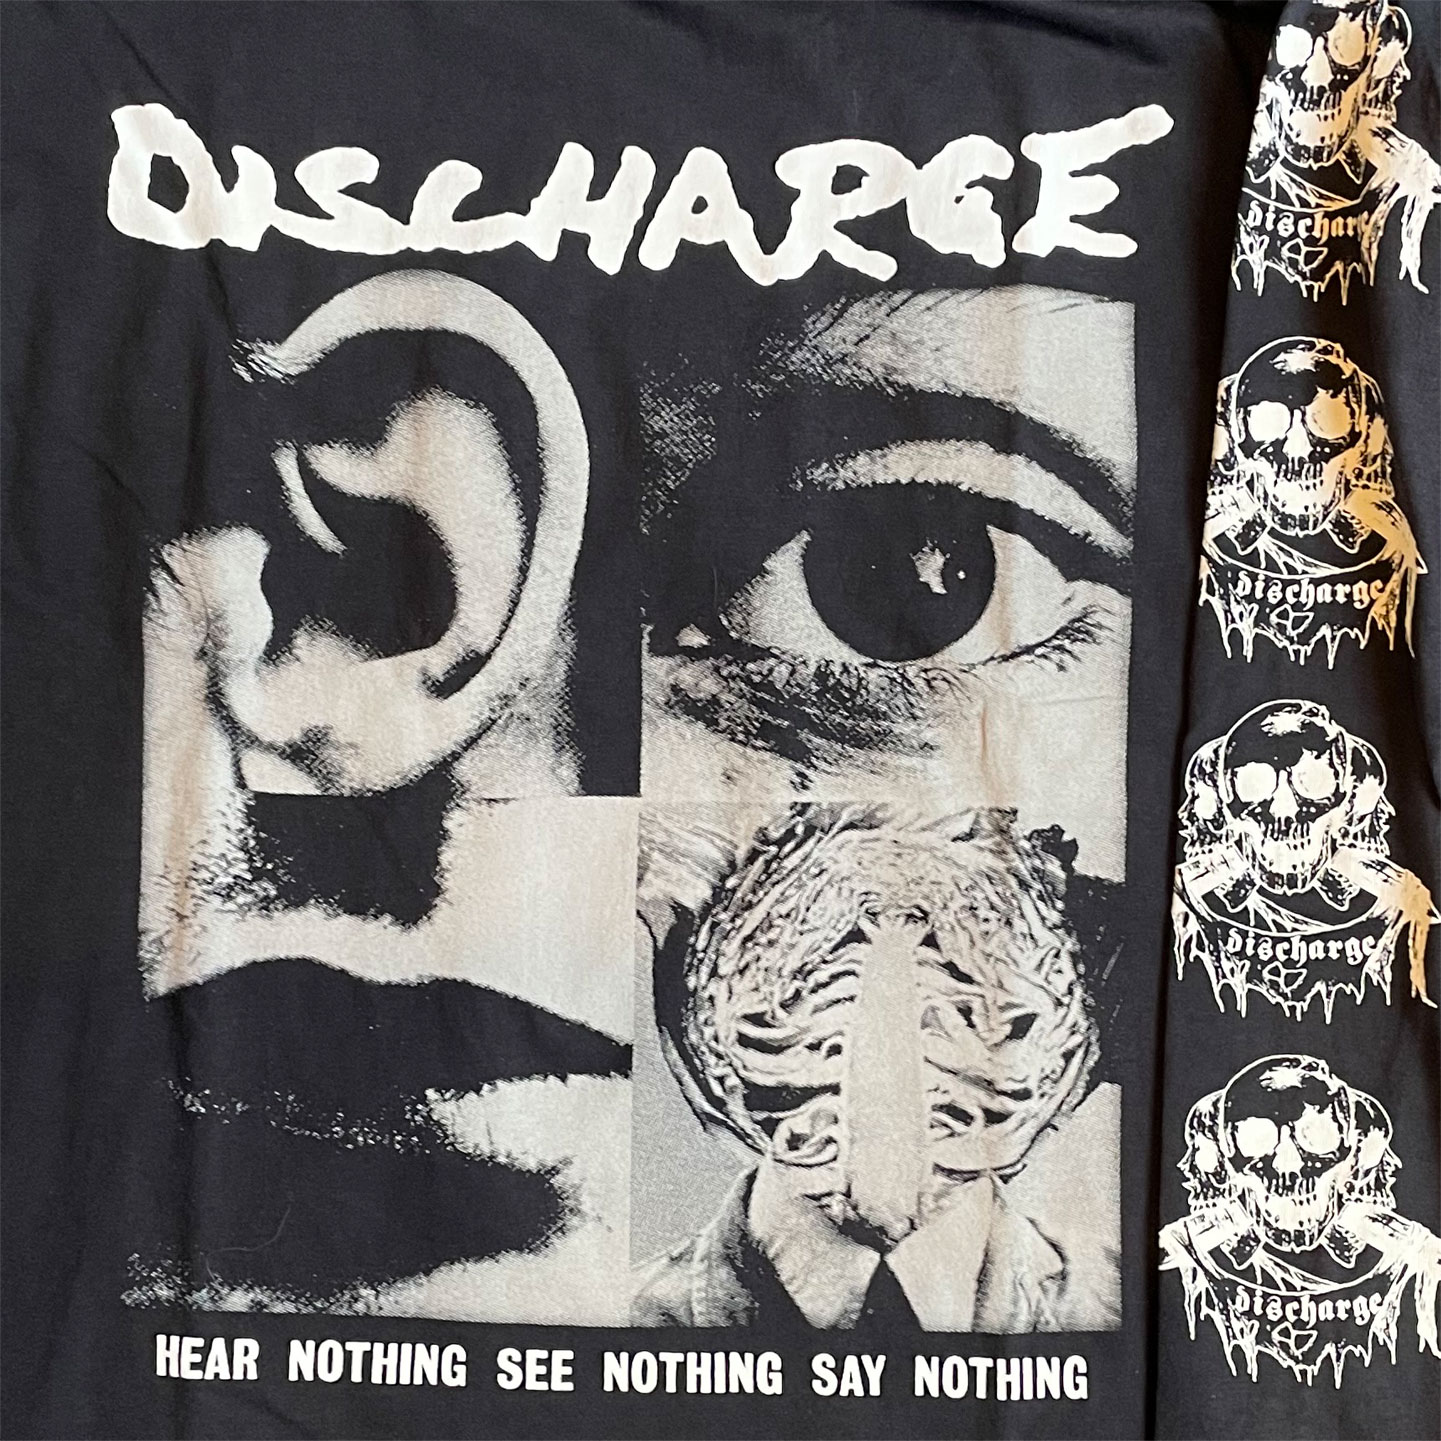 DISCHARGE ロングスリーブTシャツ HEAR NOTHING SEE NOTHING SAY NOTHING オフィシャル！